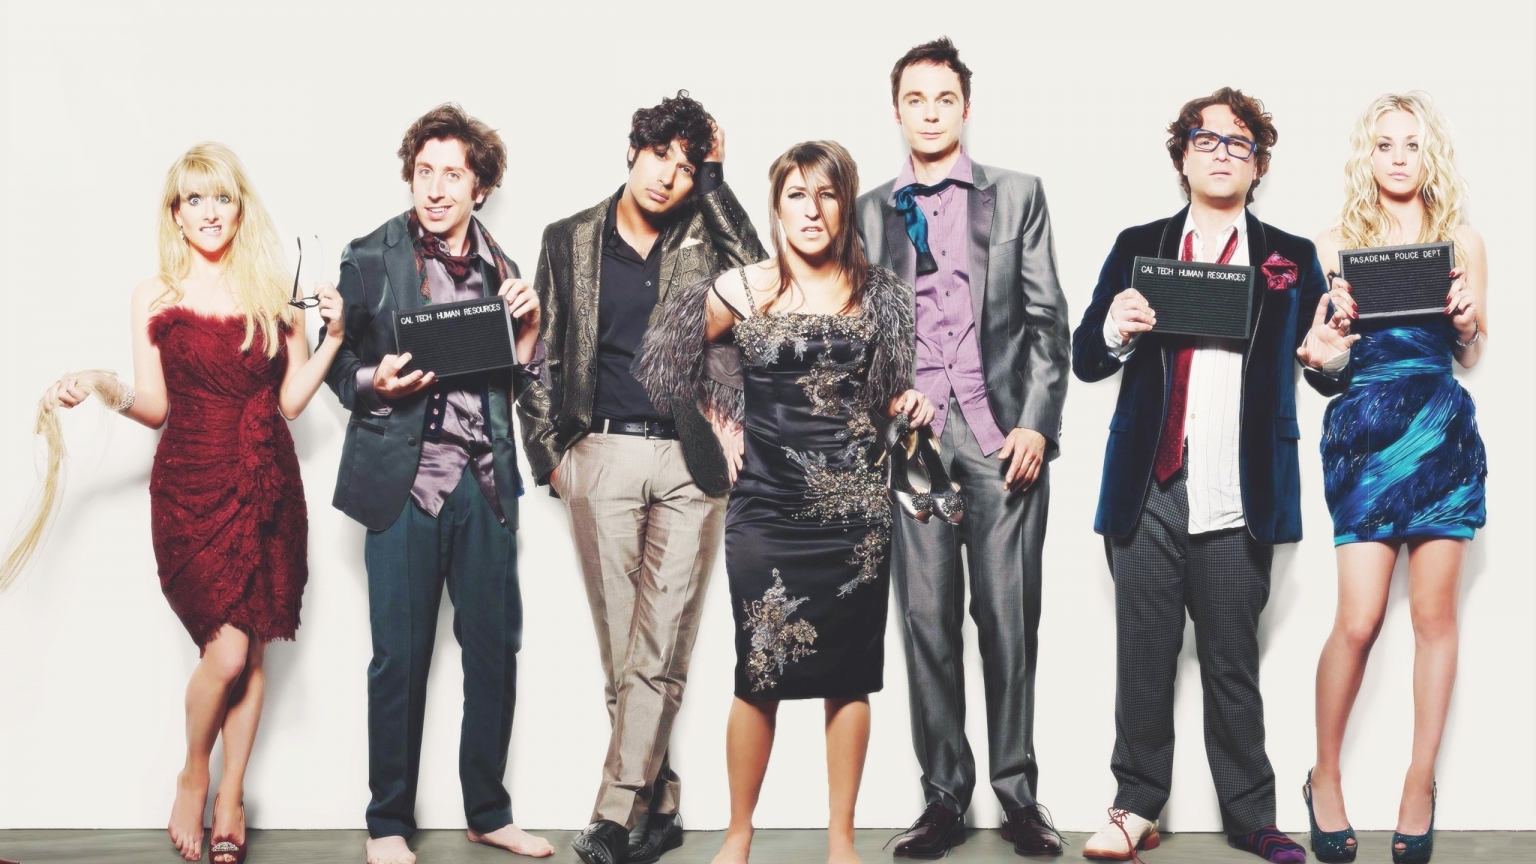 The Big Bang Theory Cast for 1536 x 864 HDTV resolution